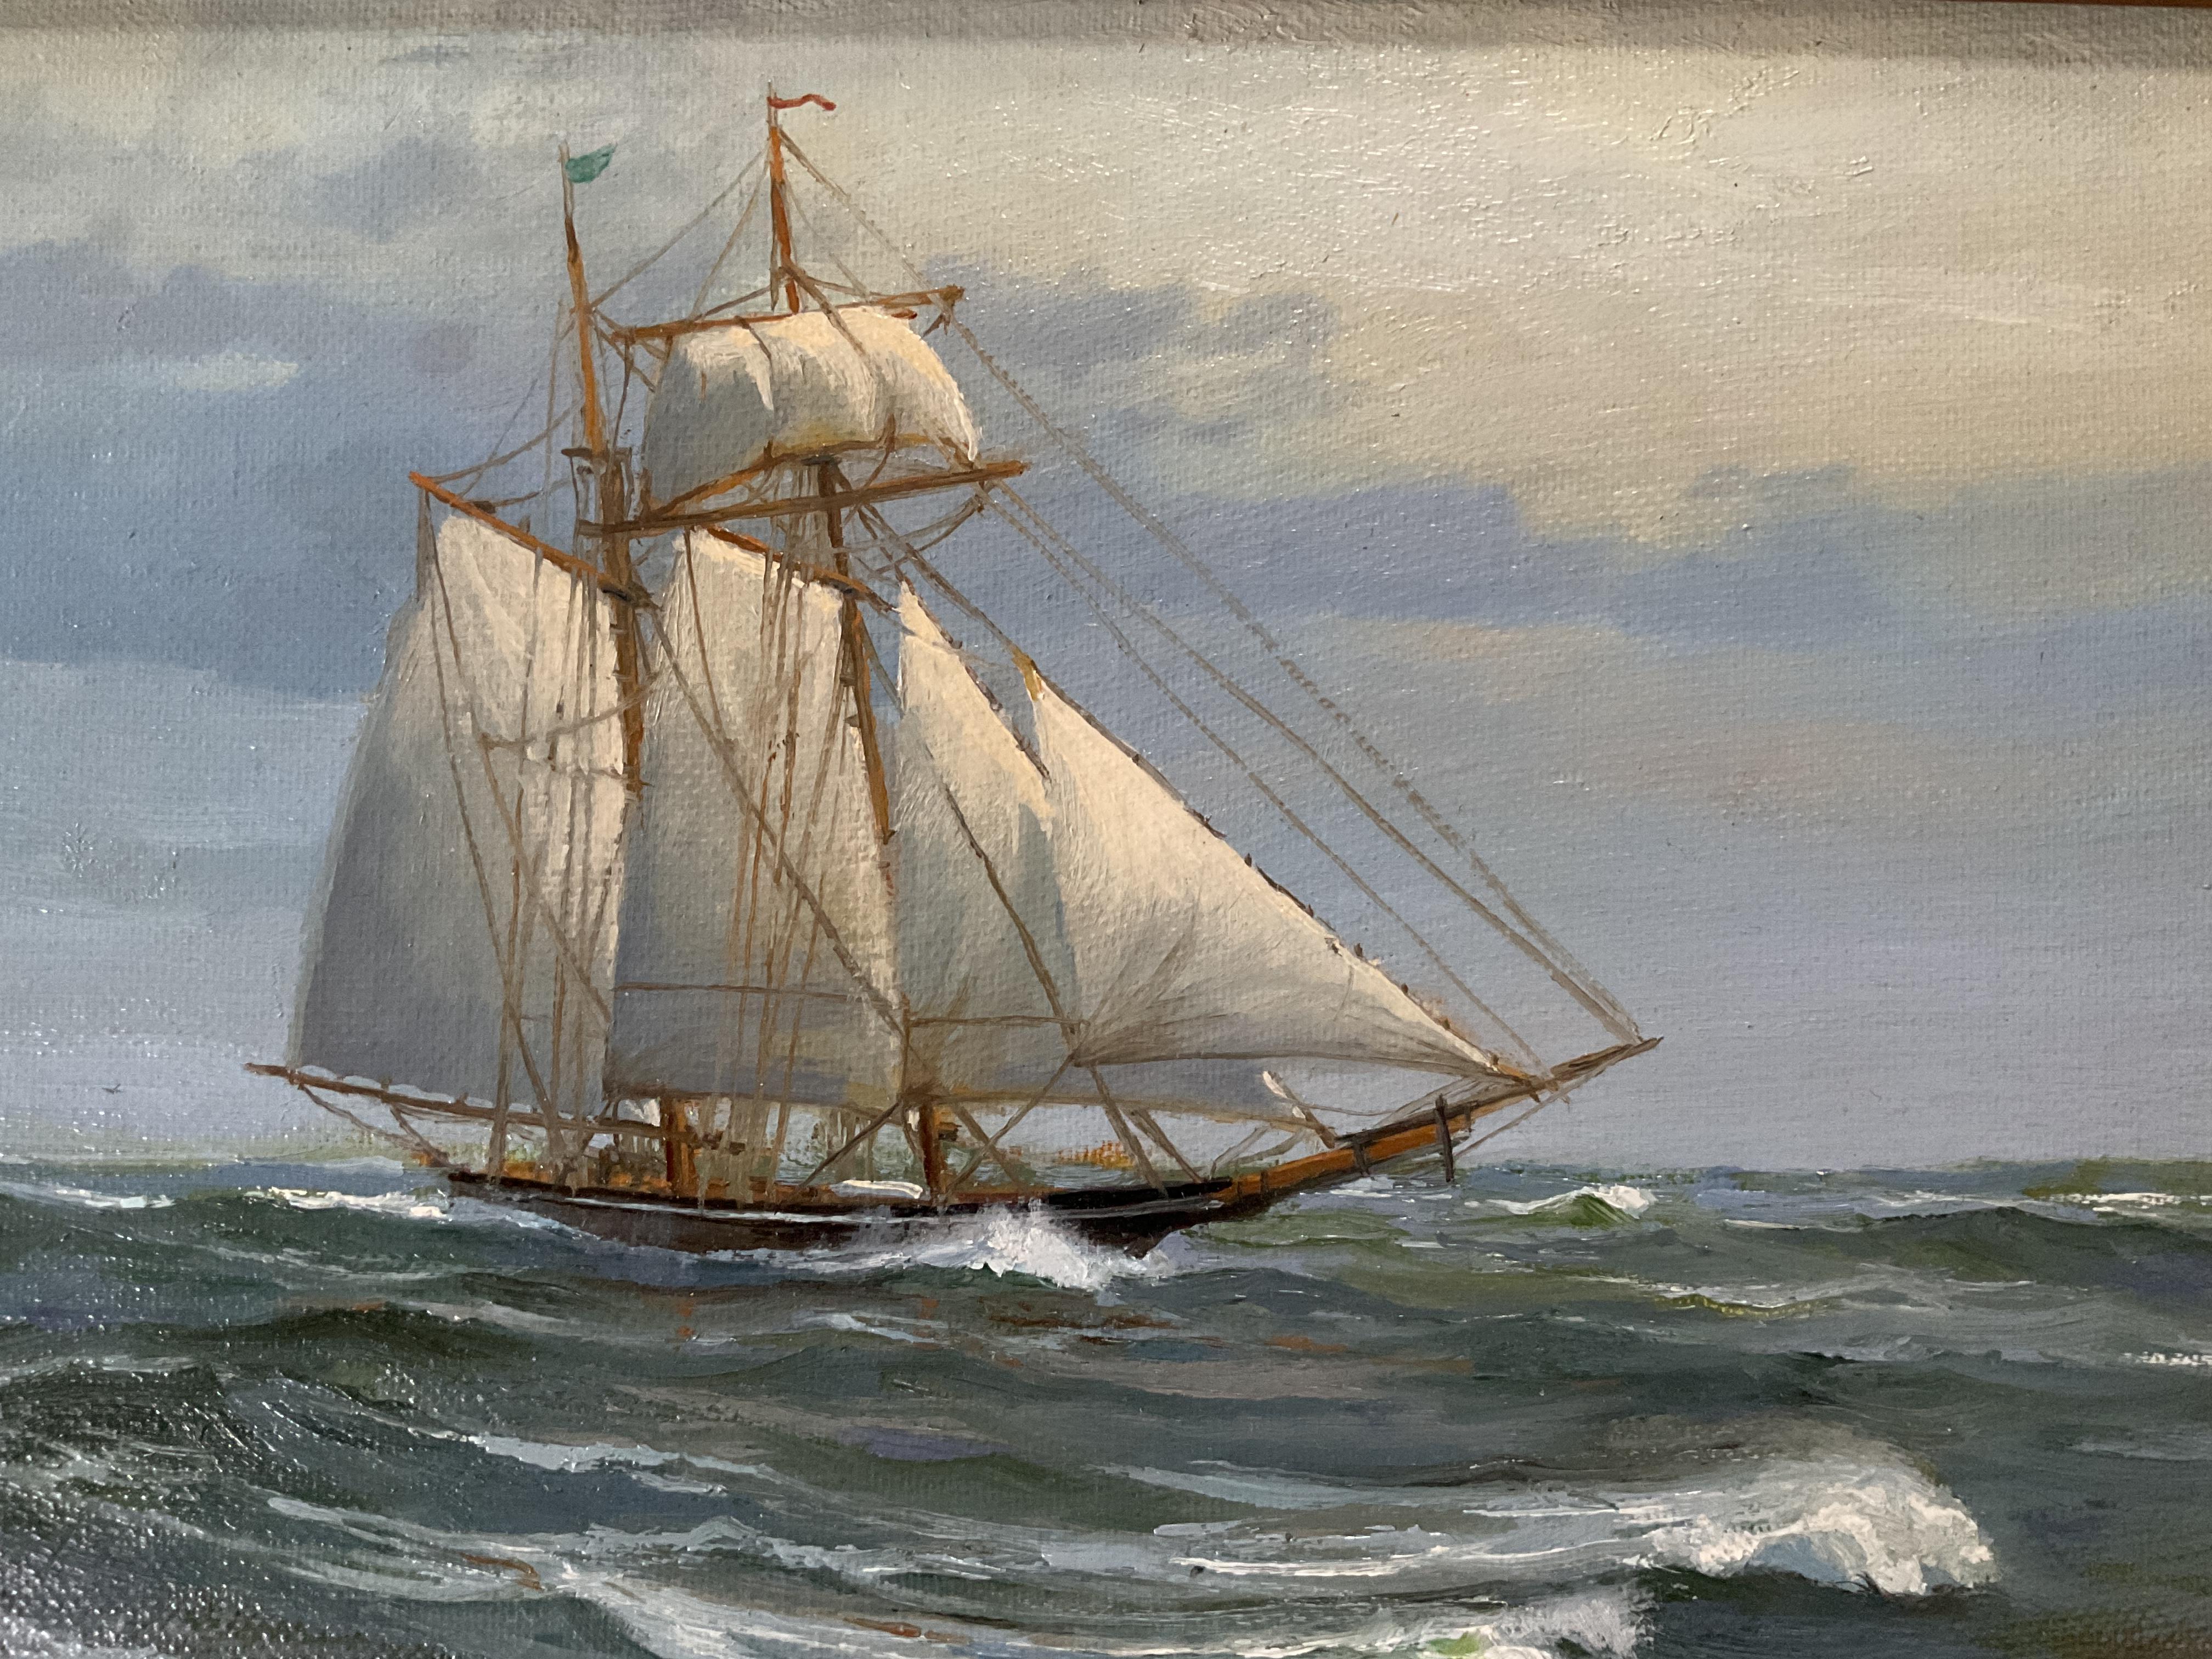 West Coast artist Phillip Schuster is a well known maritime painter who was born in 1948.  This work, signed by him in the lower left and titled “Last Days” on the reverse side, may be referring to the end of the voyage for this schooner.

The ship